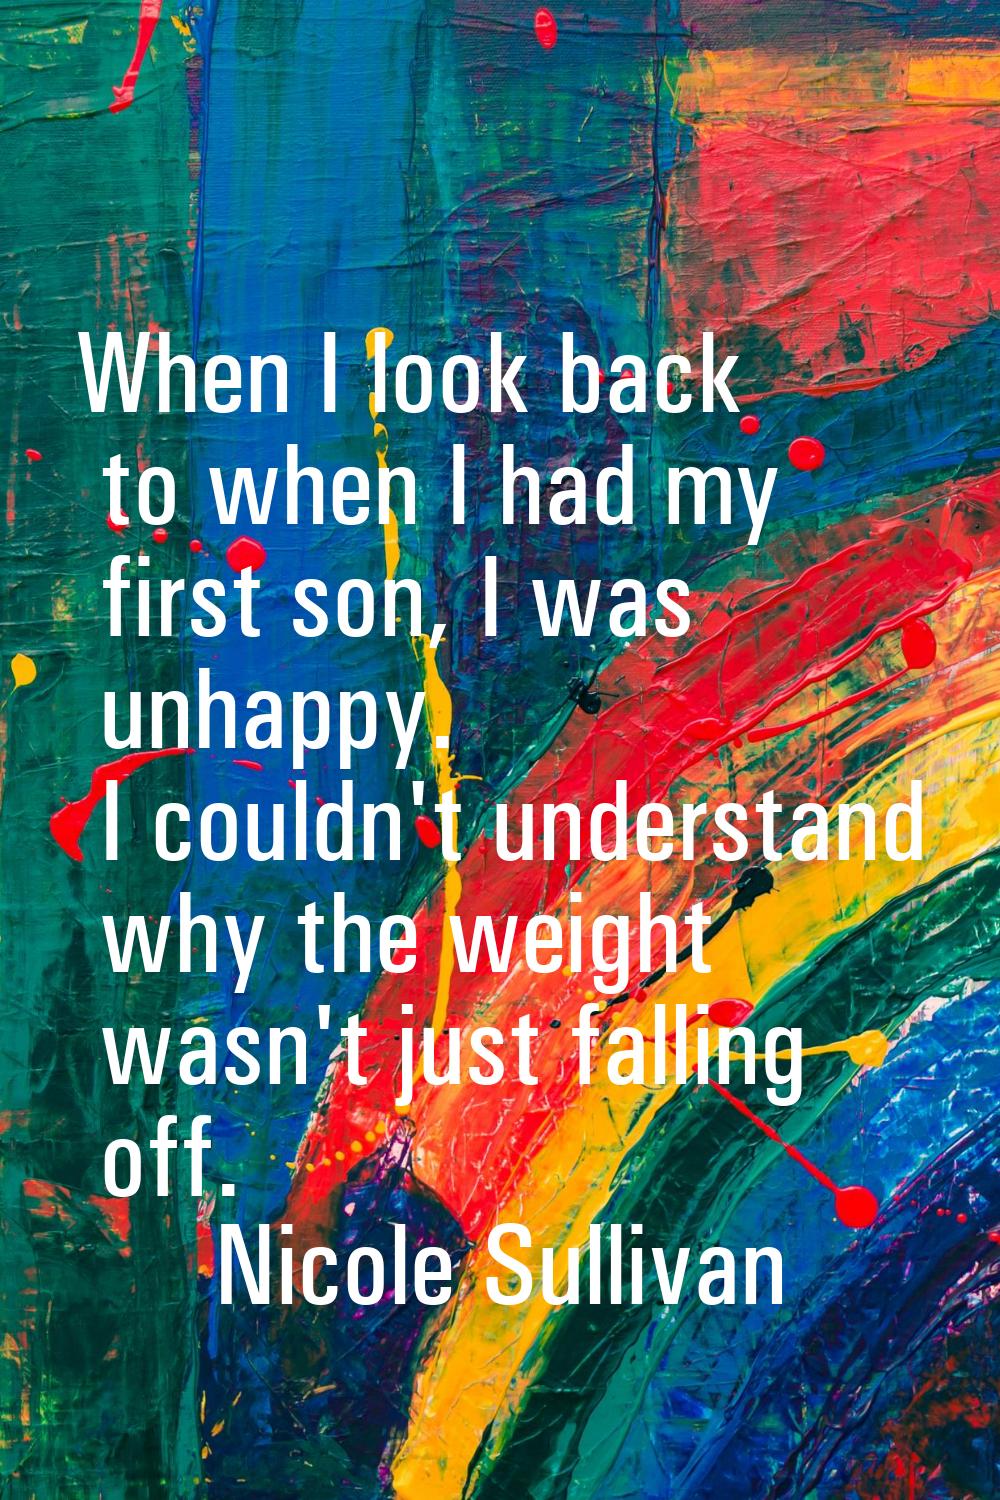 When I look back to when I had my first son, I was unhappy. I couldn't understand why the weight wa